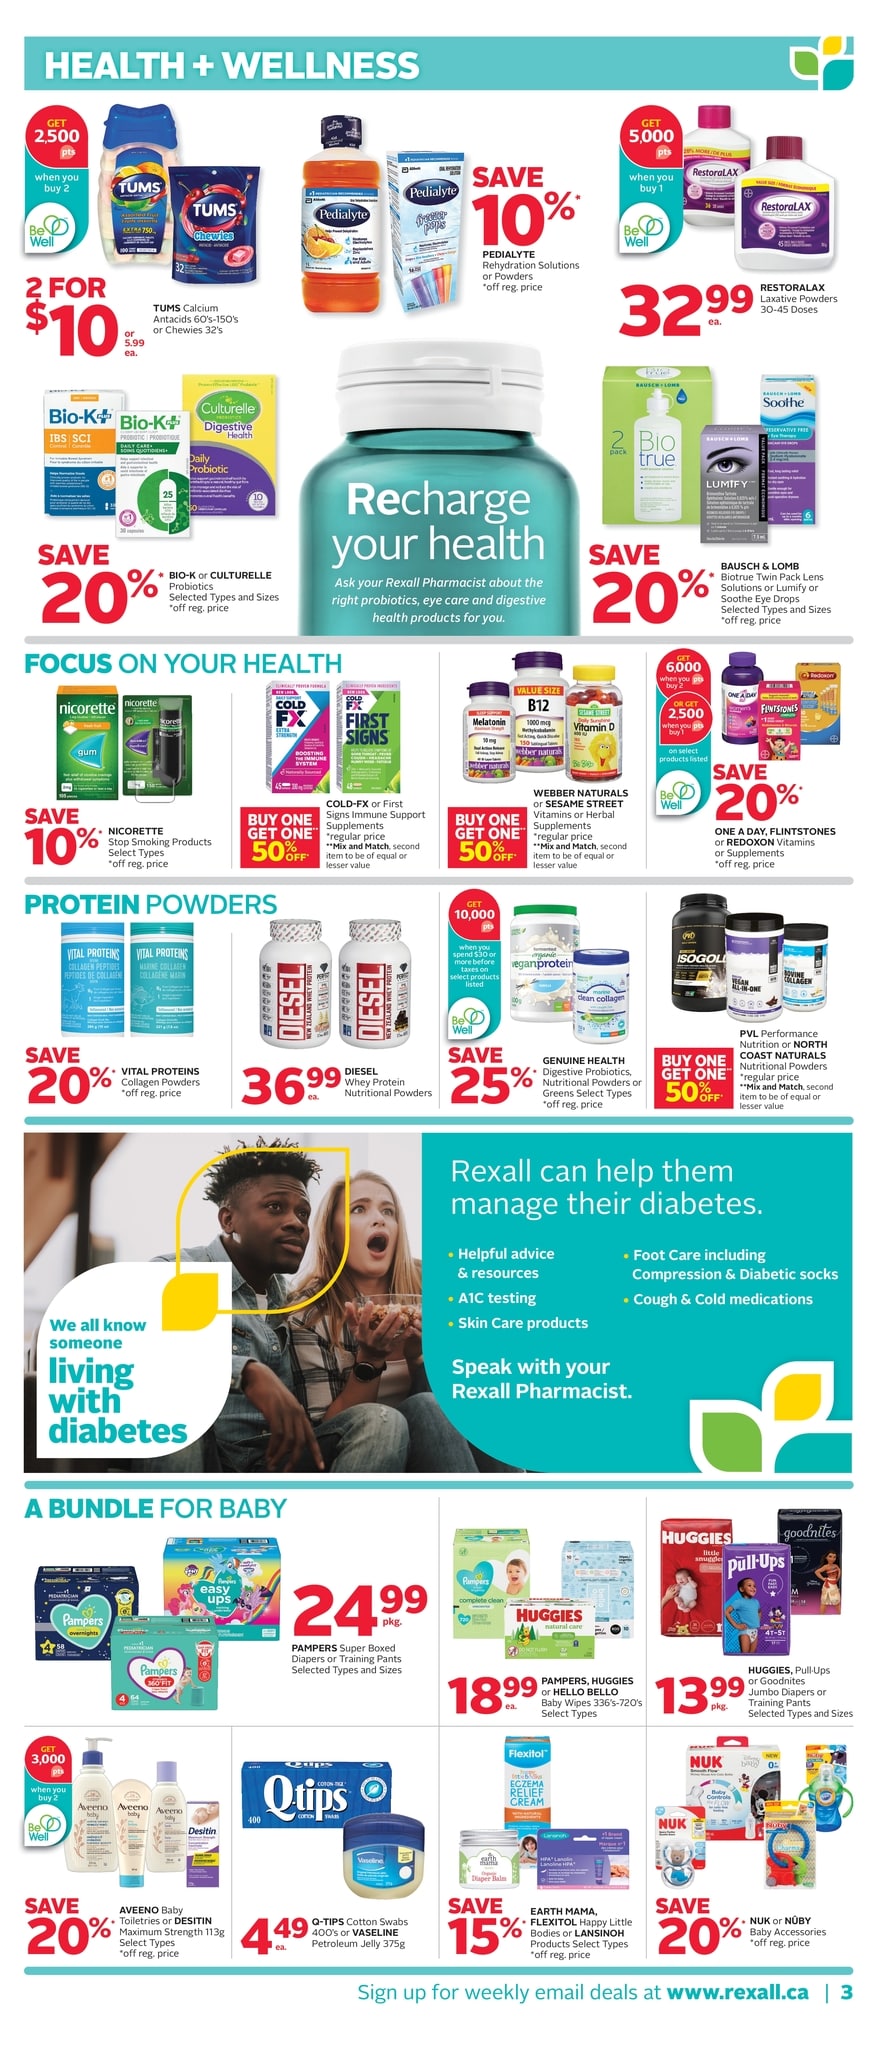 Rexall - Weekly Flyer Specials - Black Friday Deals - Page 8